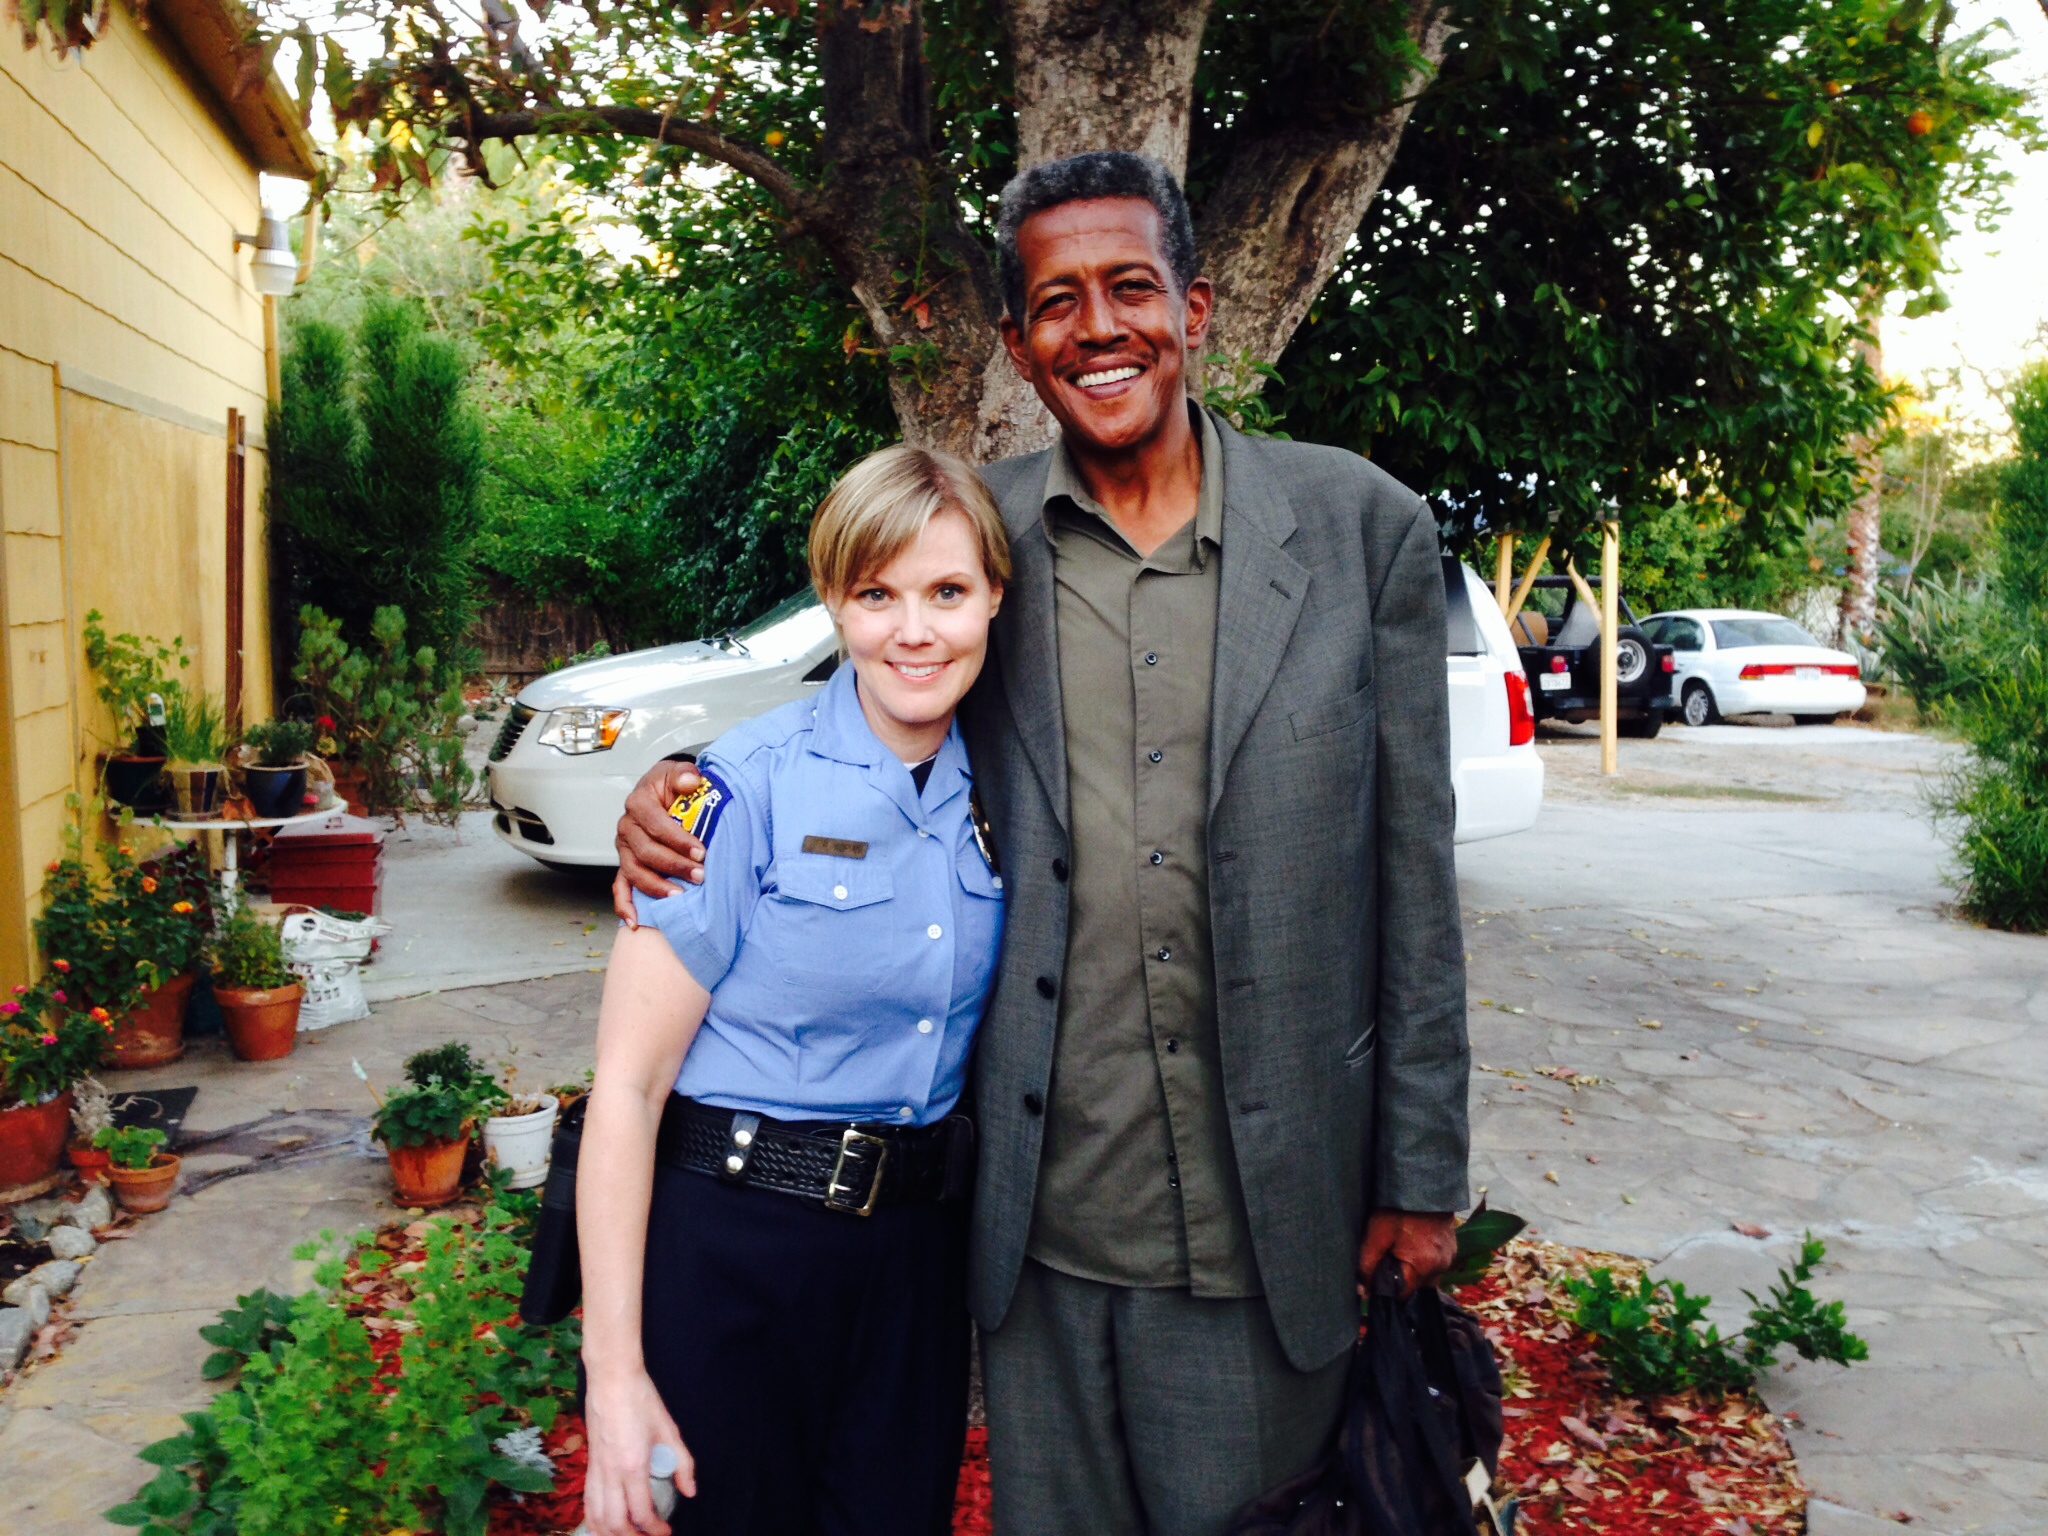 On location filming Chris Reese's SOME TORCHES DON'T BURN, with fellow cast member Shauna Gray Konnerth